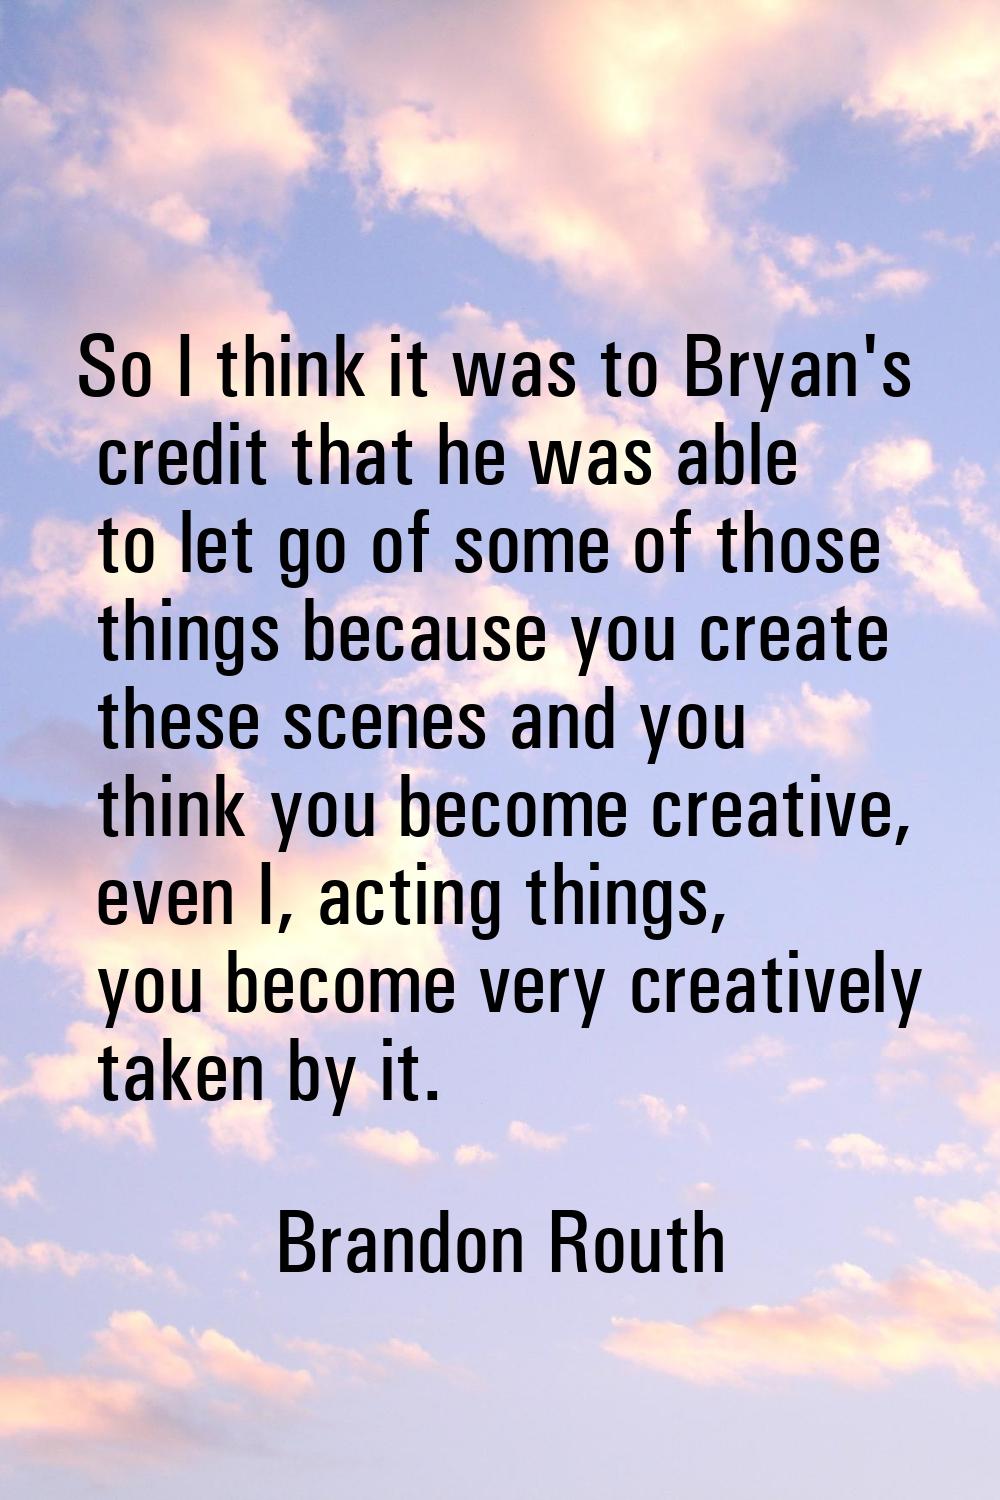 So I think it was to Bryan's credit that he was able to let go of some of those things because you 